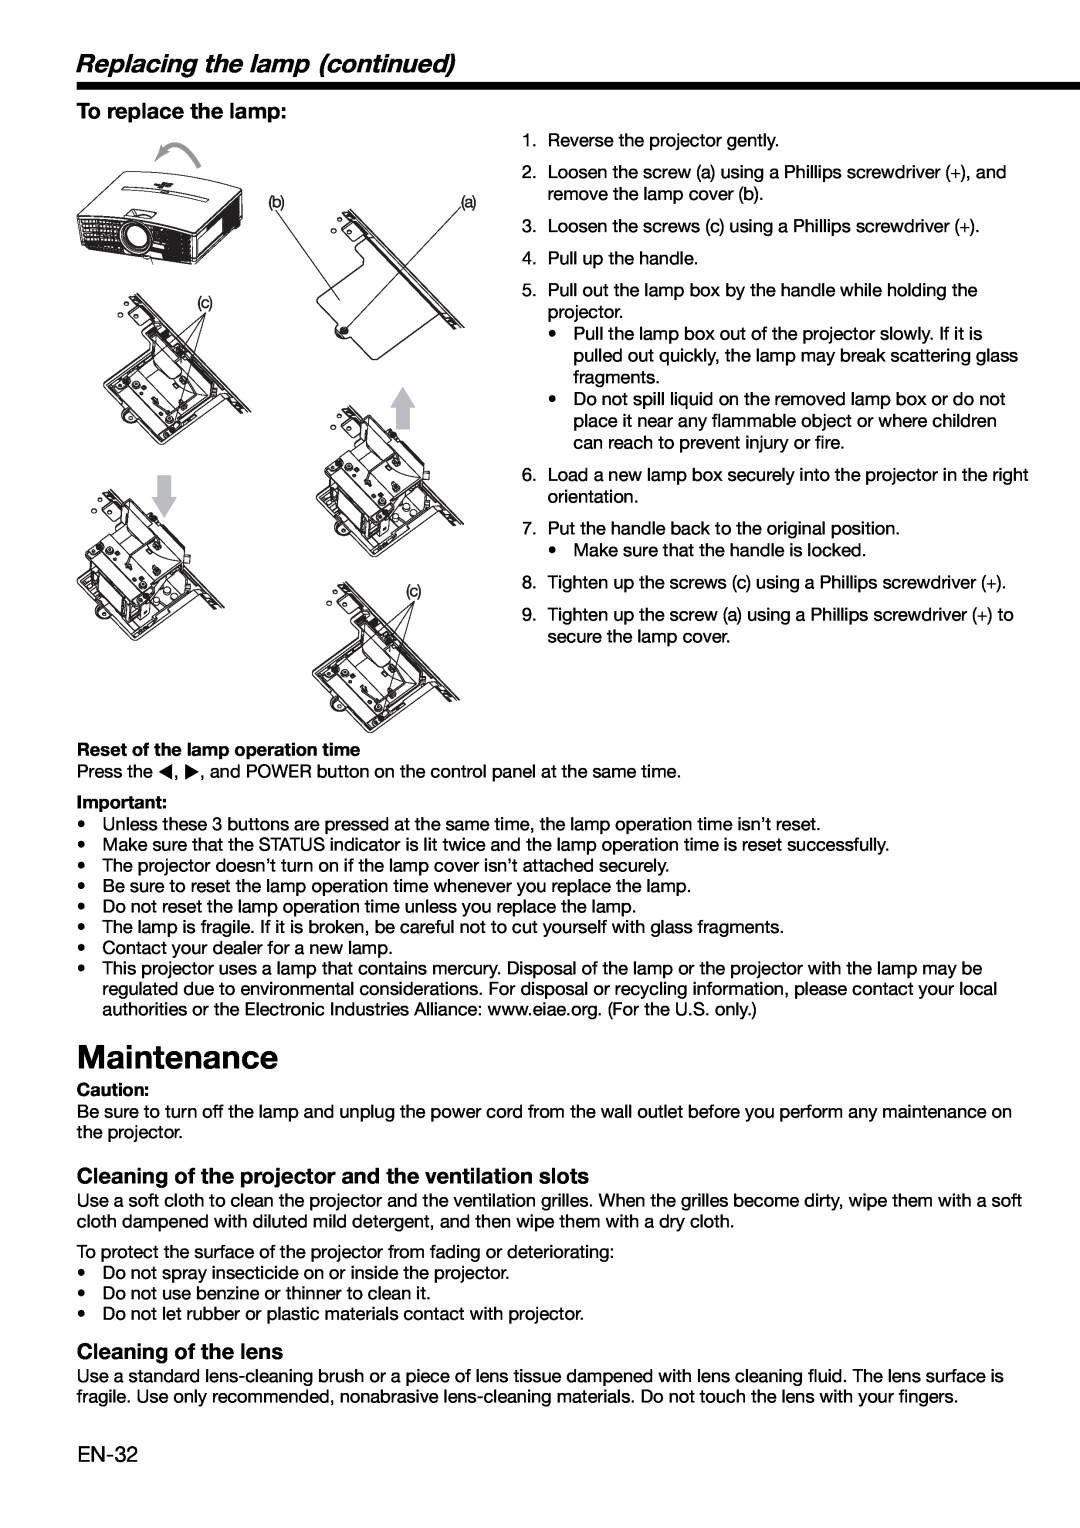 Mitsubishi Electronics XD490U user manual Replacing the lamp continued, Maintenance, Reset of the lamp operation time 